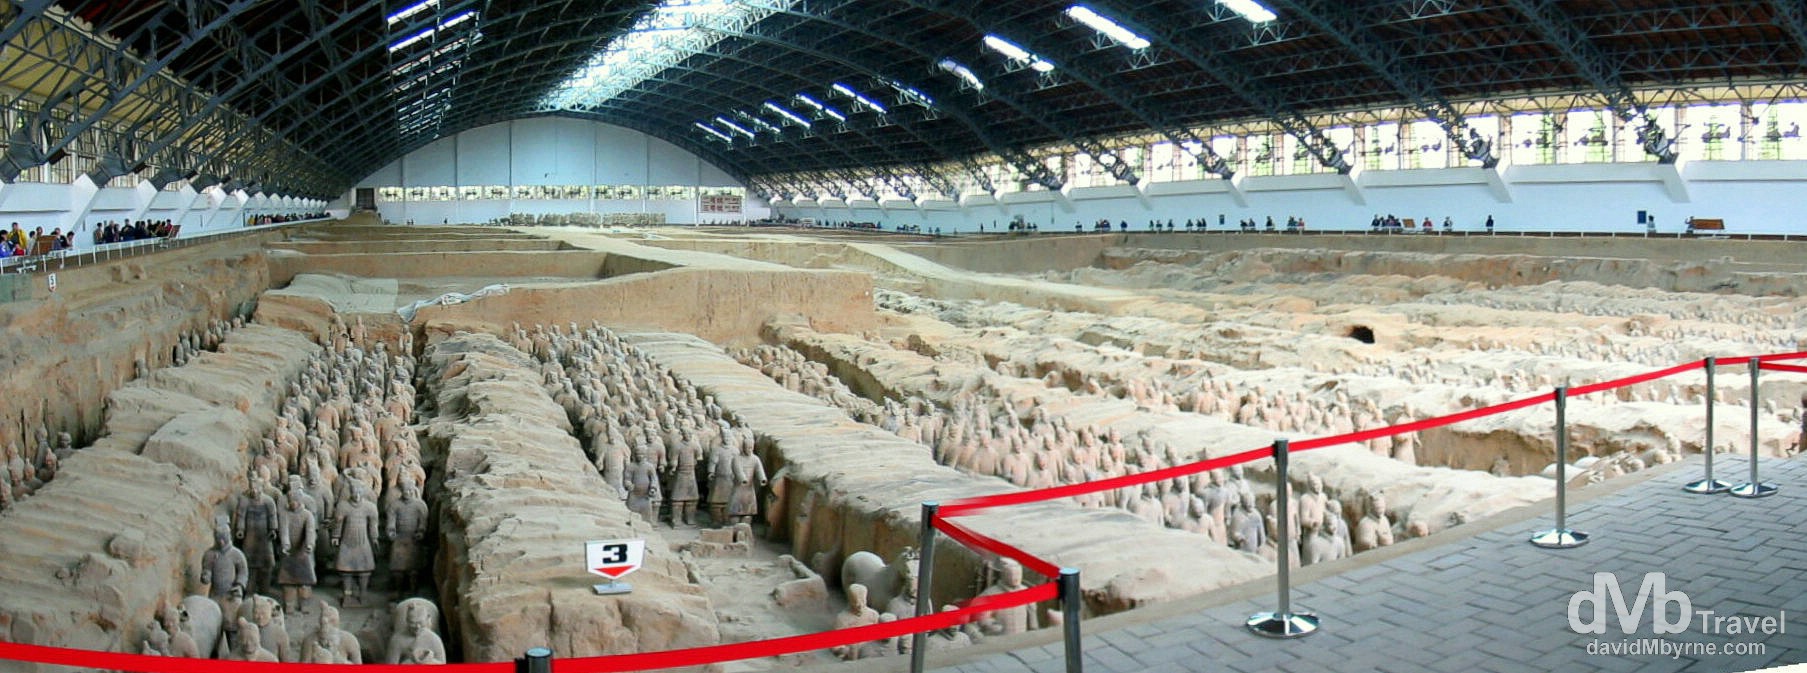 Vault 1 of the Terracotta Army on the outskirts of Xian, Shaanxi Province, China. September 30th, 2004